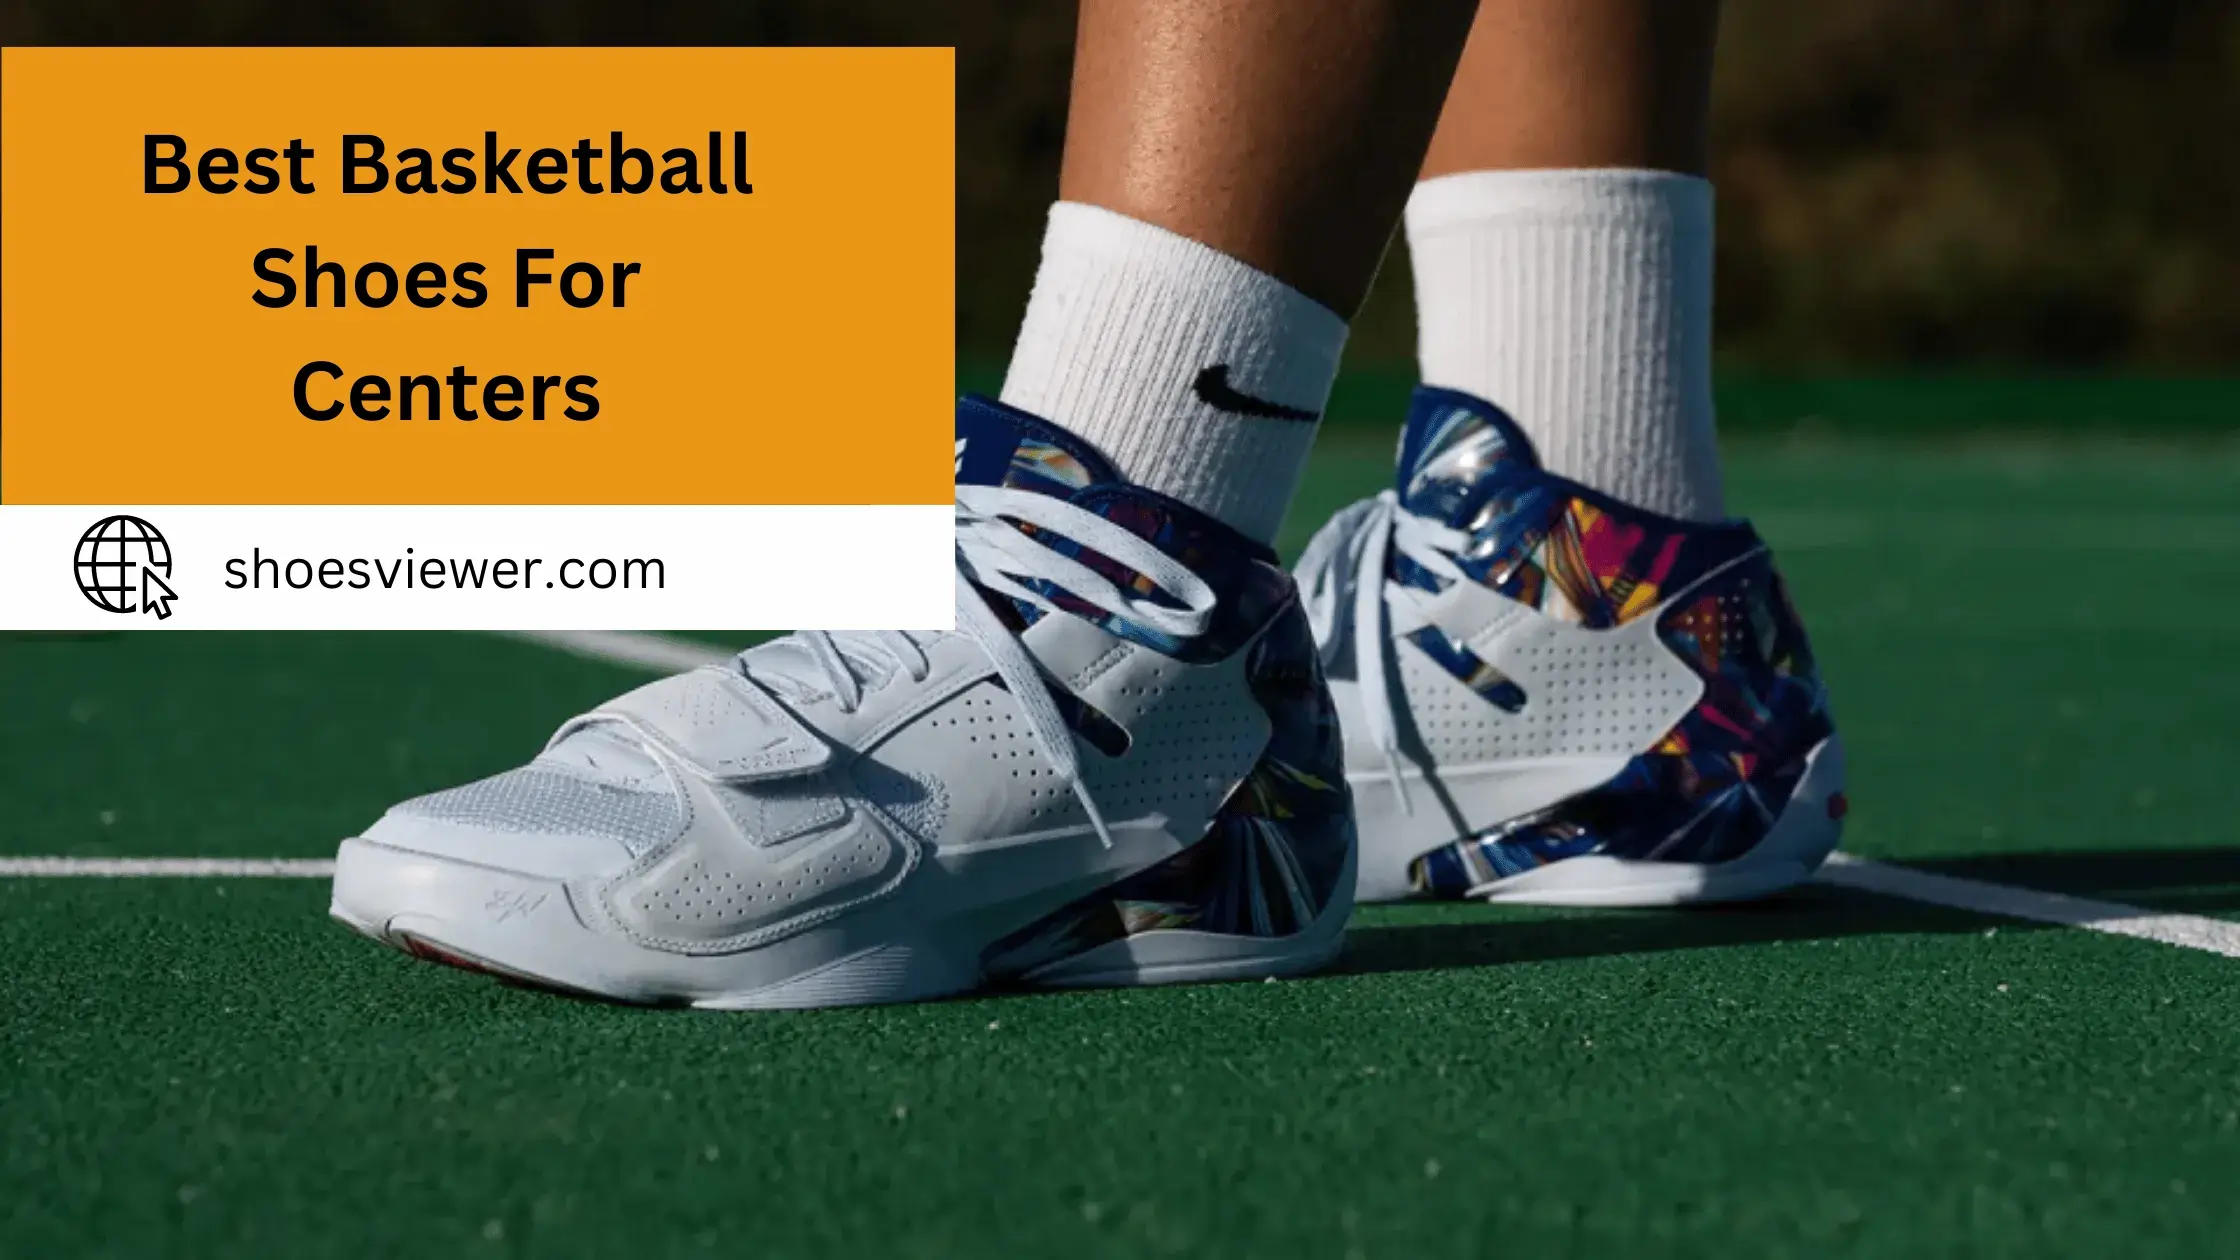 Top Rated 10 Best Basketball Shoes For Plantar Fasciitis